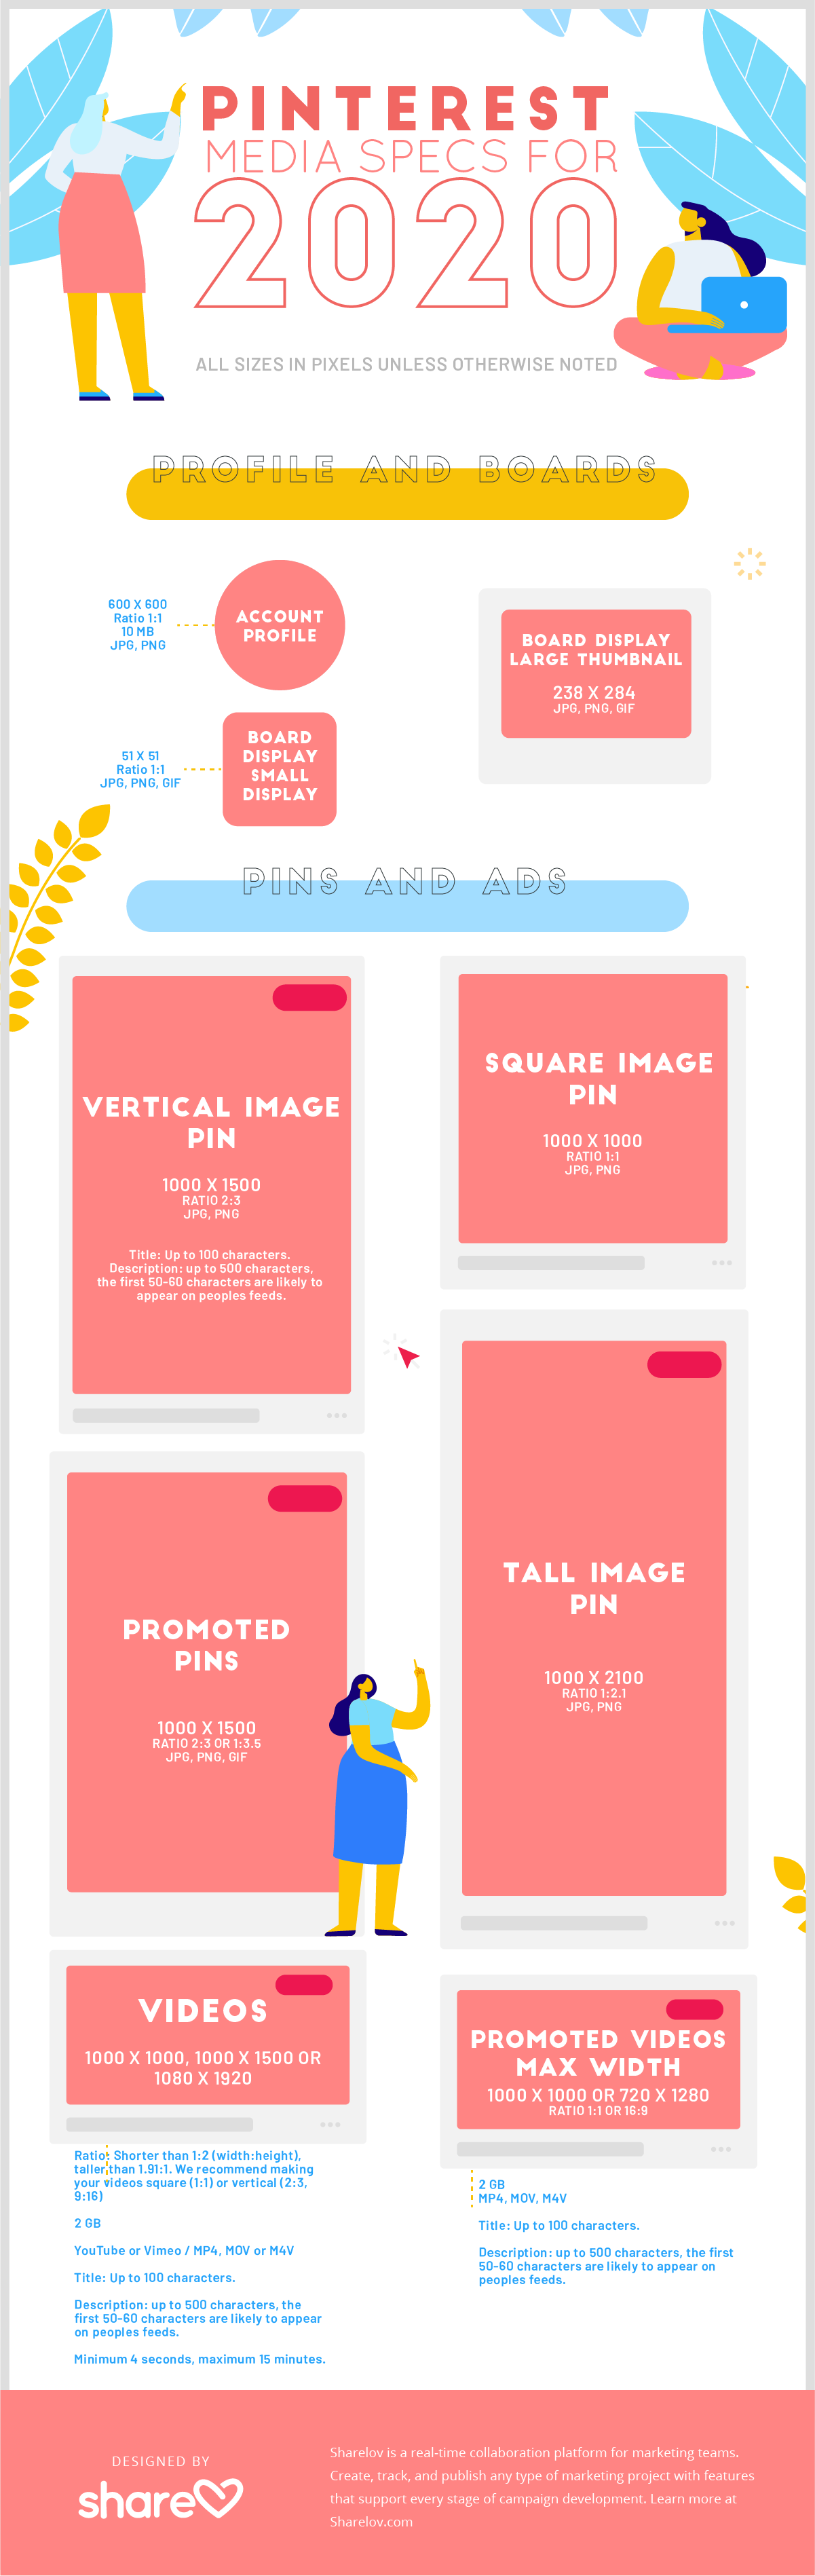 Complete Guide to Social Media Image Sizes for 2020